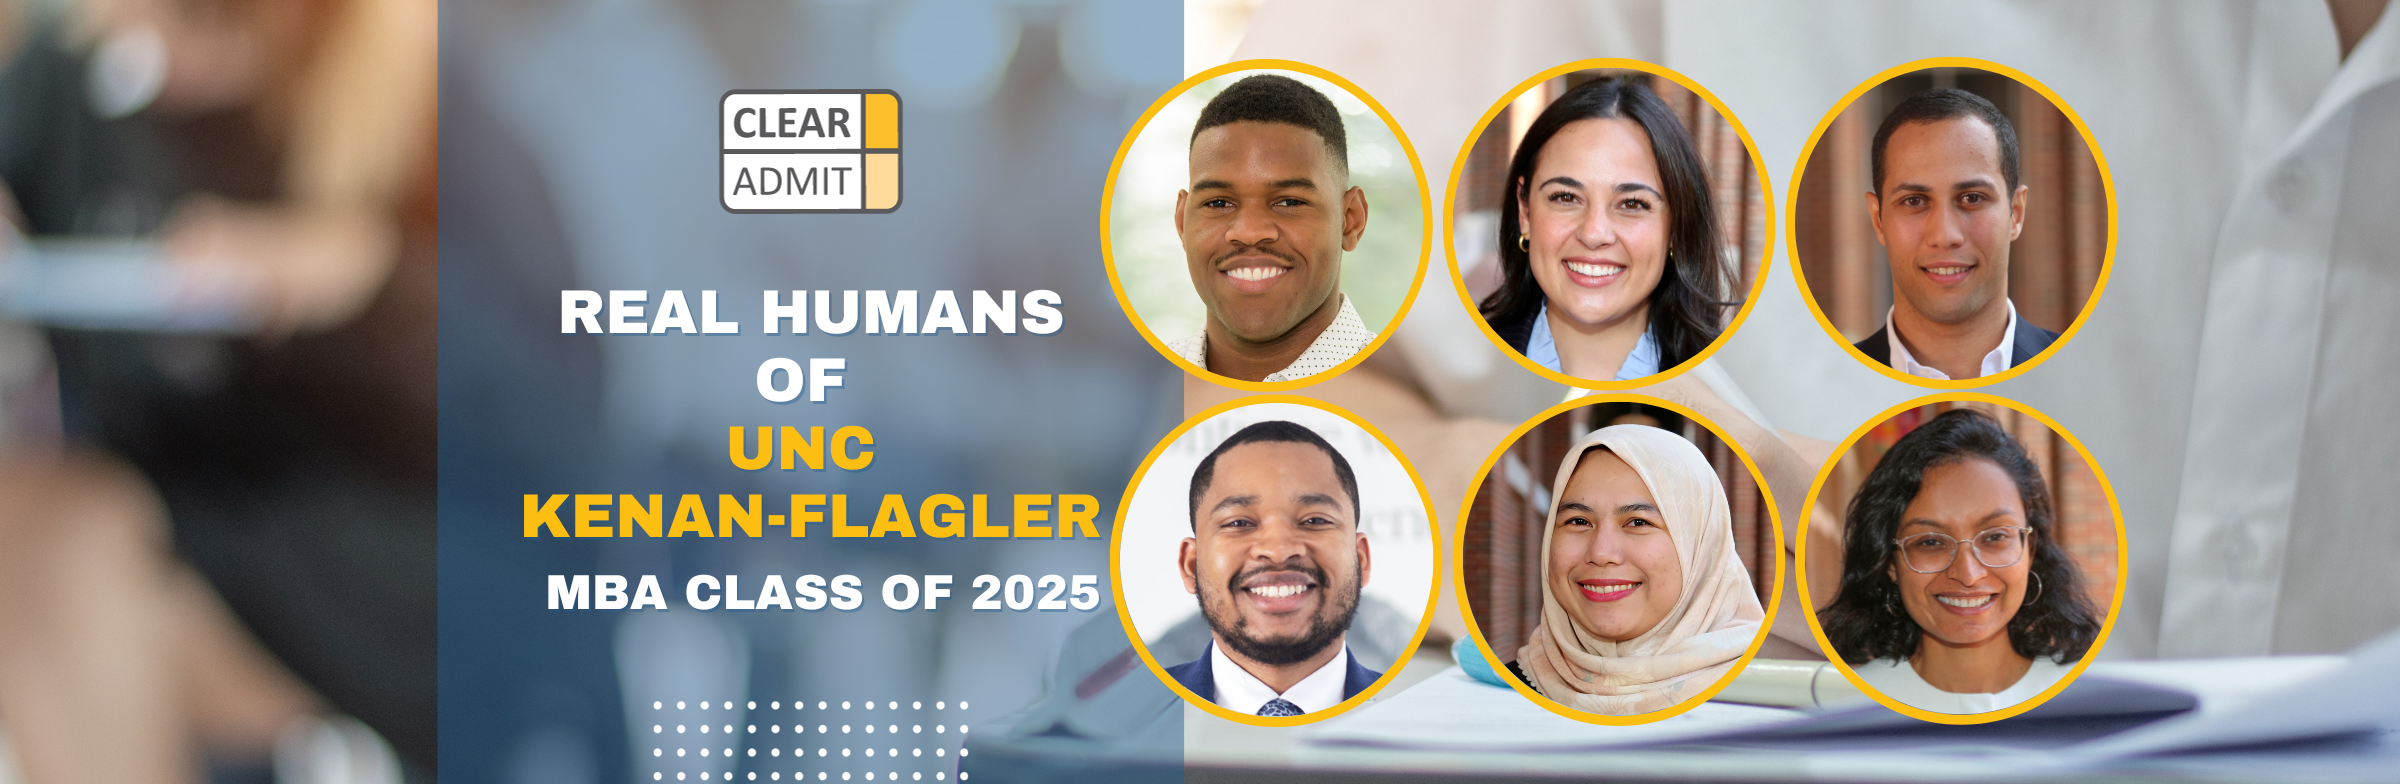 Image for Real Humans of the UNC Kenan-Flagler MBA Class of 2025